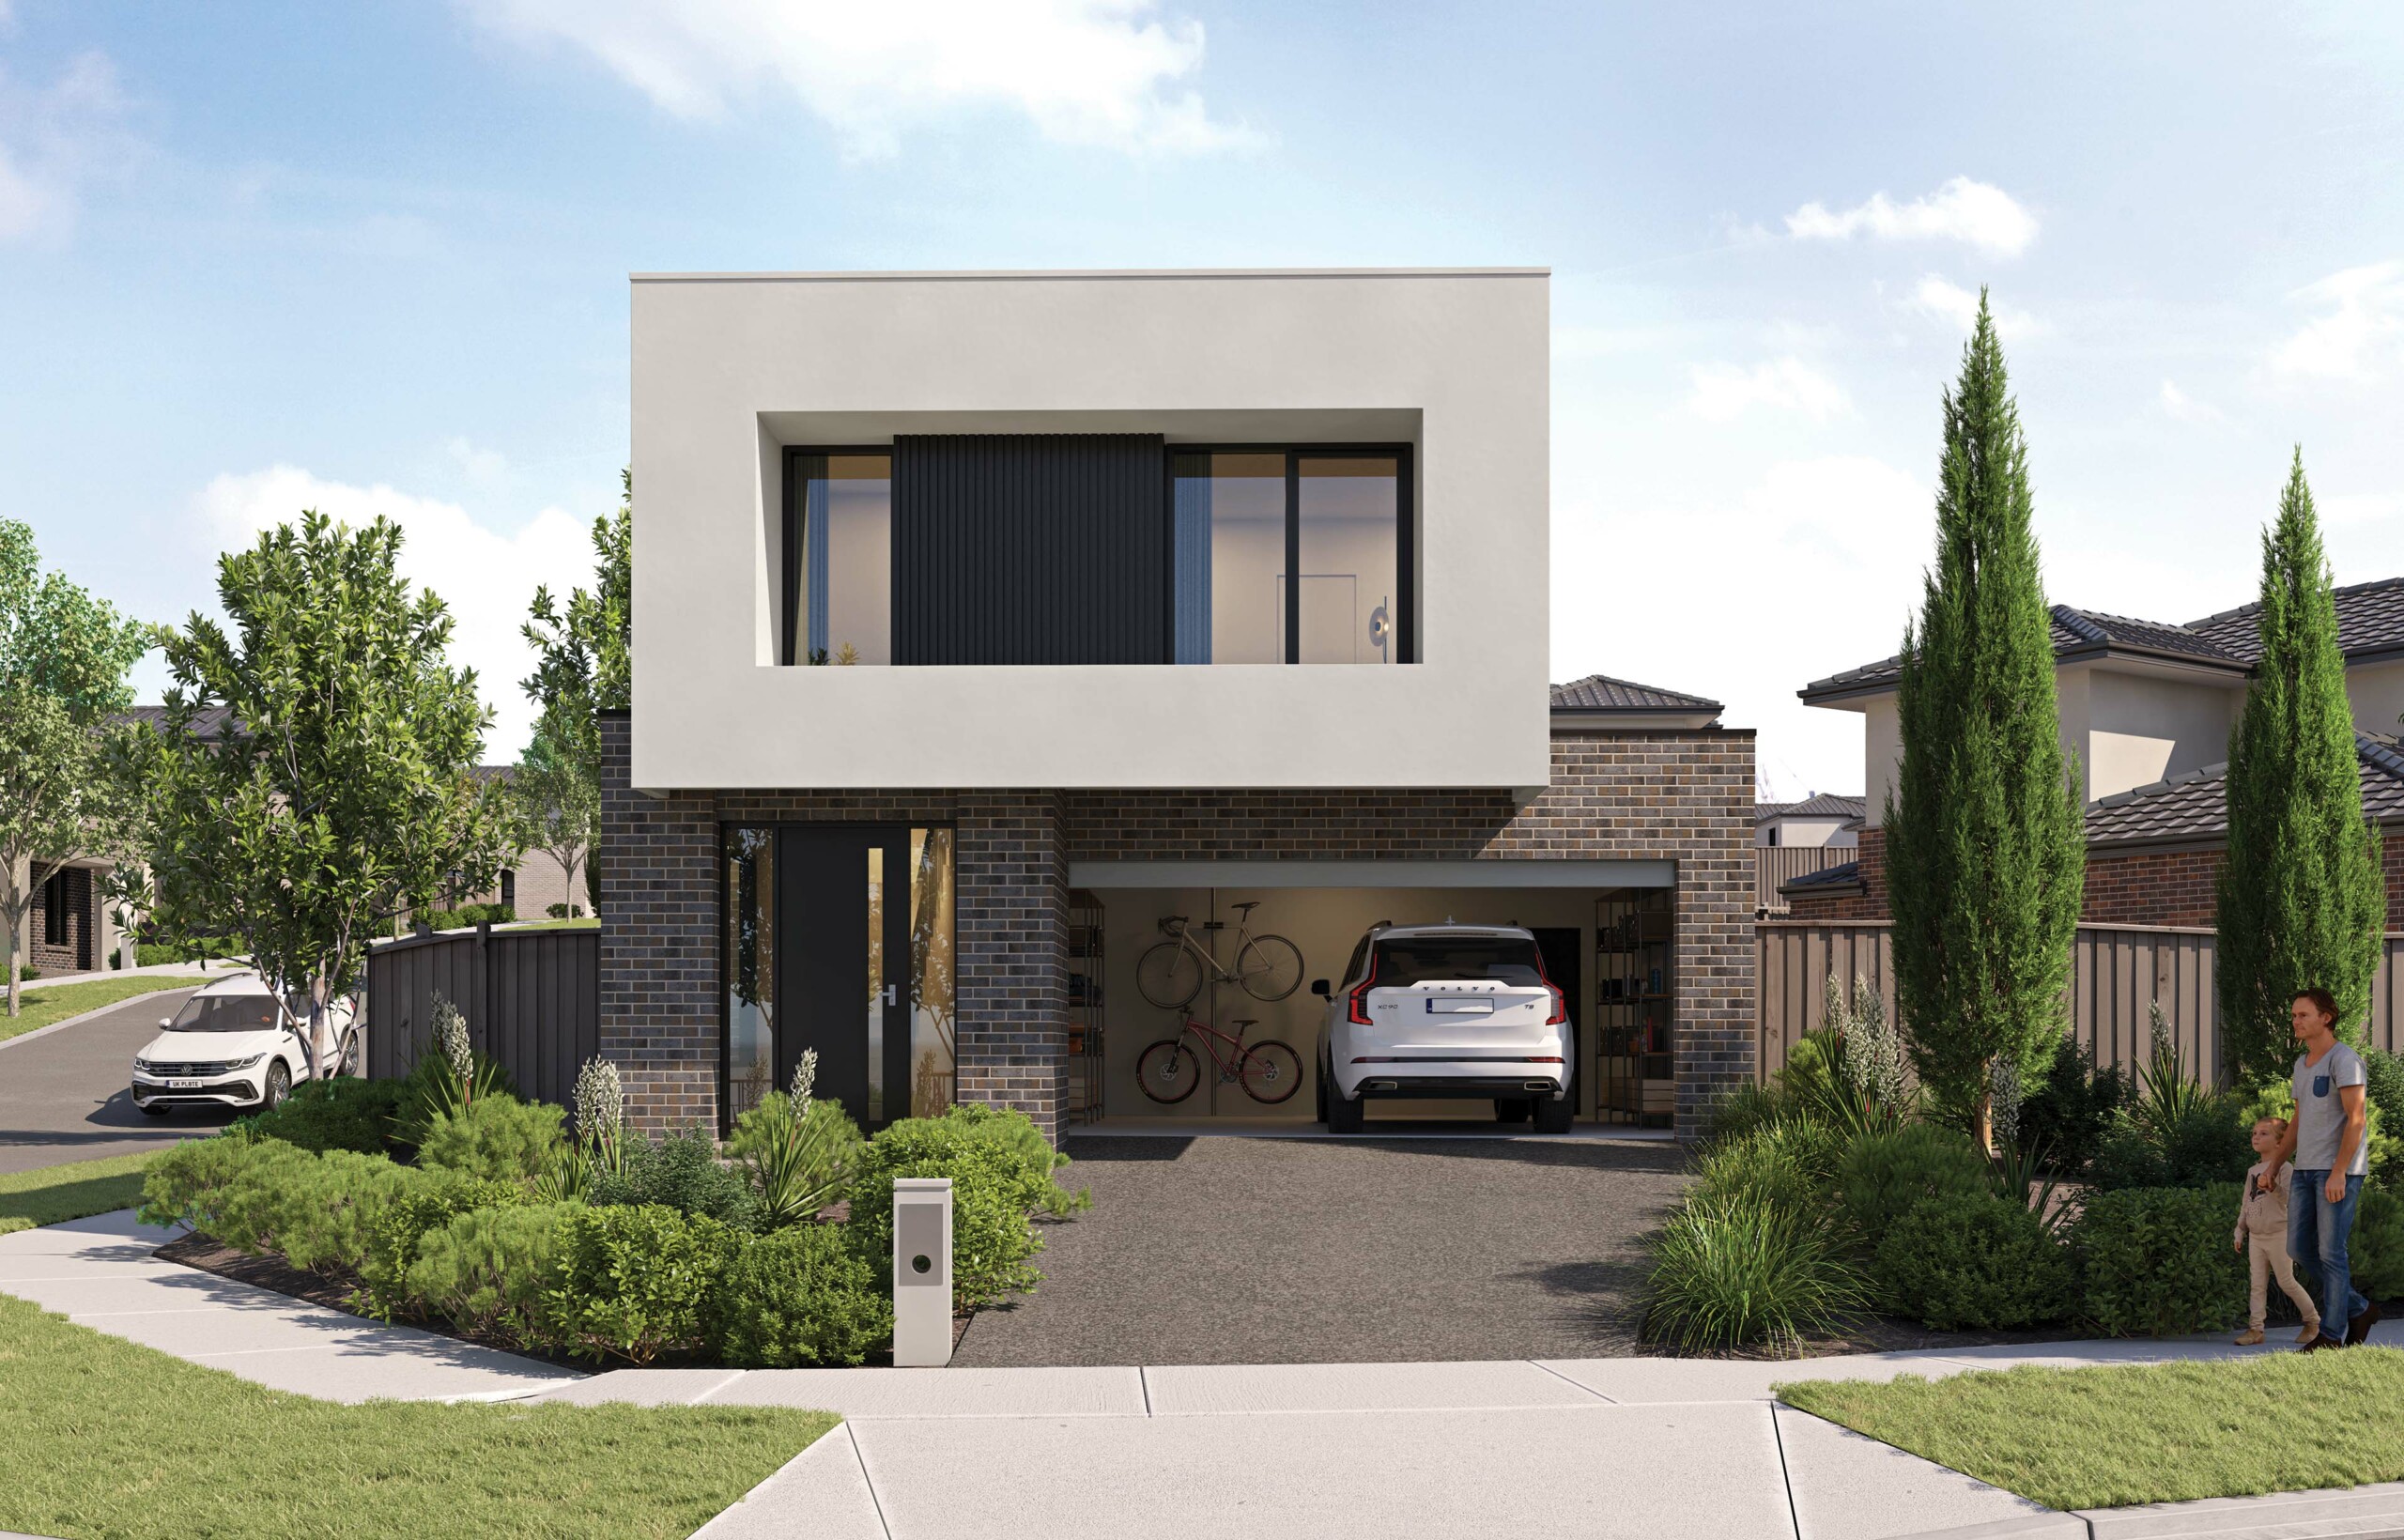 St Helena Place two storey corner house artist impression with father and child walking out the front